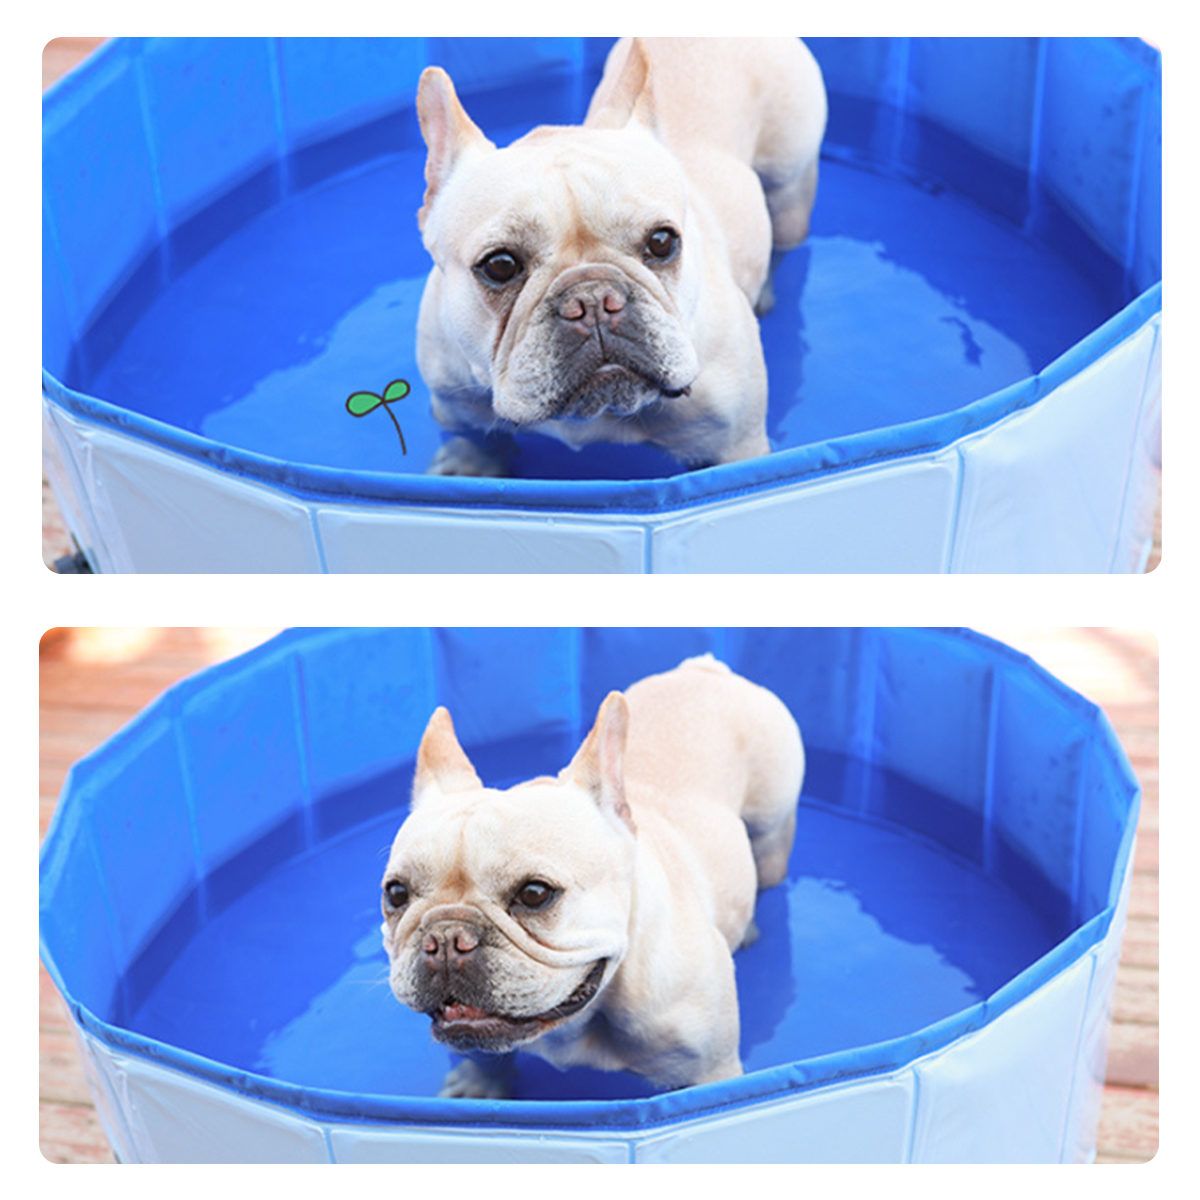 Pet-Outdoor-Swimming-Pool-Shower-Foldable-Pet-Swimming-Pool-Easy-Carry-Dog-Cat-Pet-Shower-Swimming-P-1759068-6